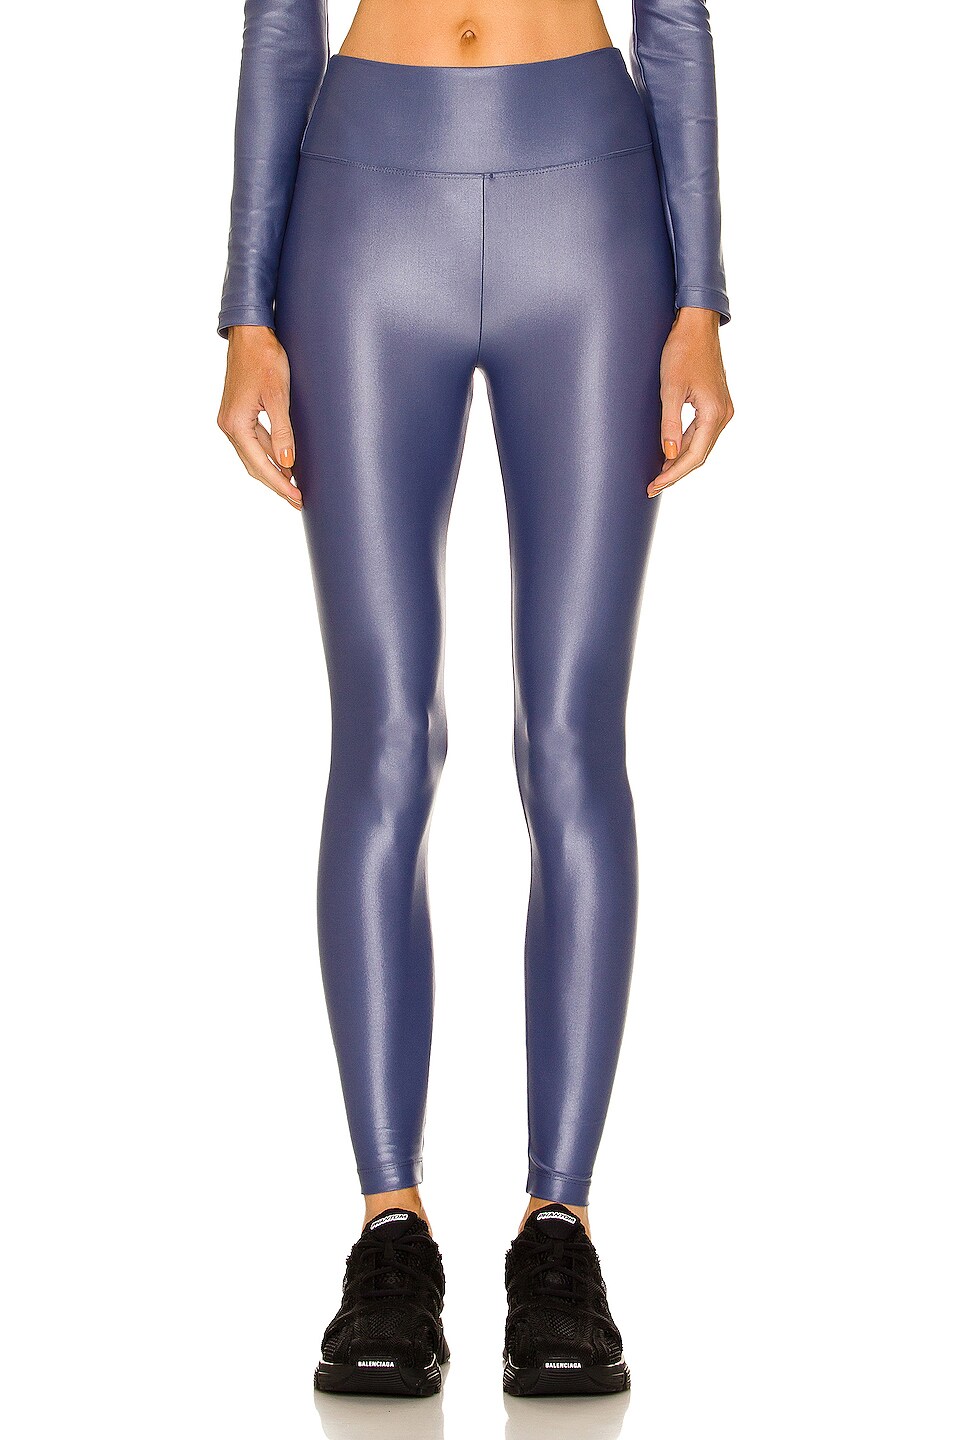 Image 1 of KORAL Lustrous Max High Rise Infinity Legging in Blue Shadow